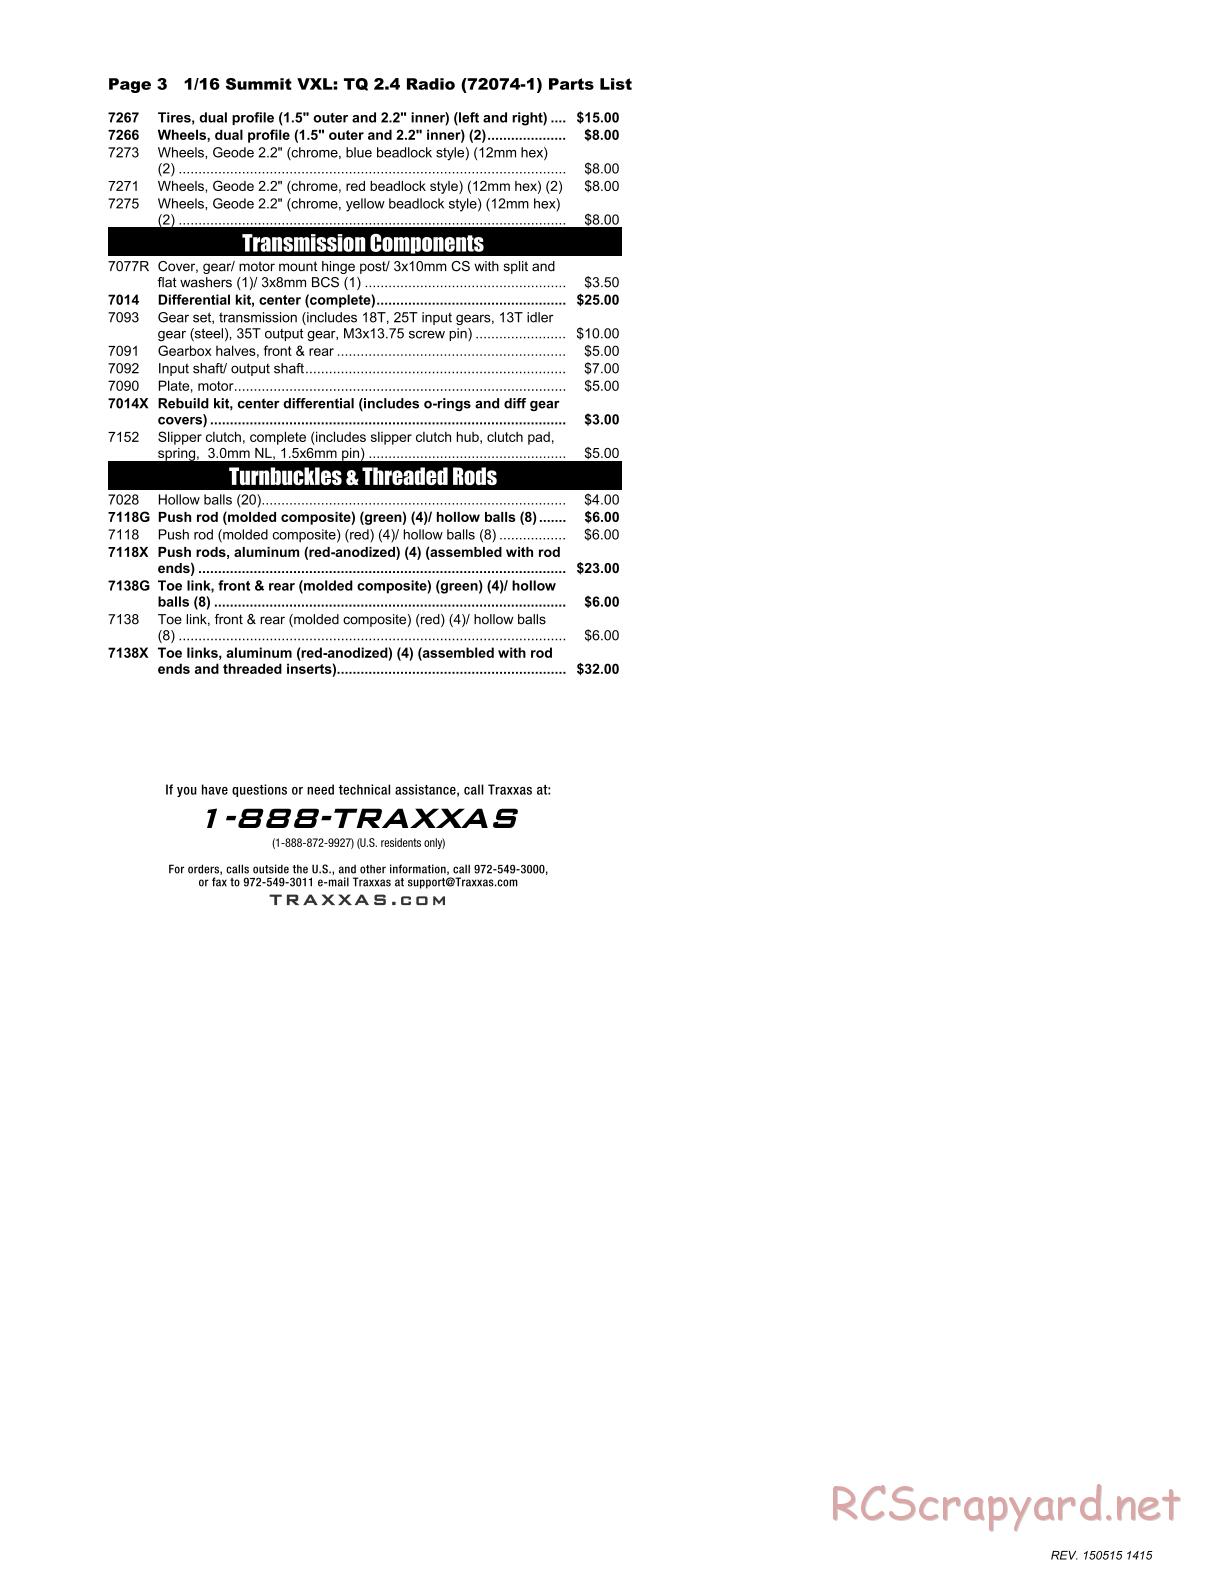 Traxxas - 1/16 Summit VXL (2015) - Parts List - Page 3